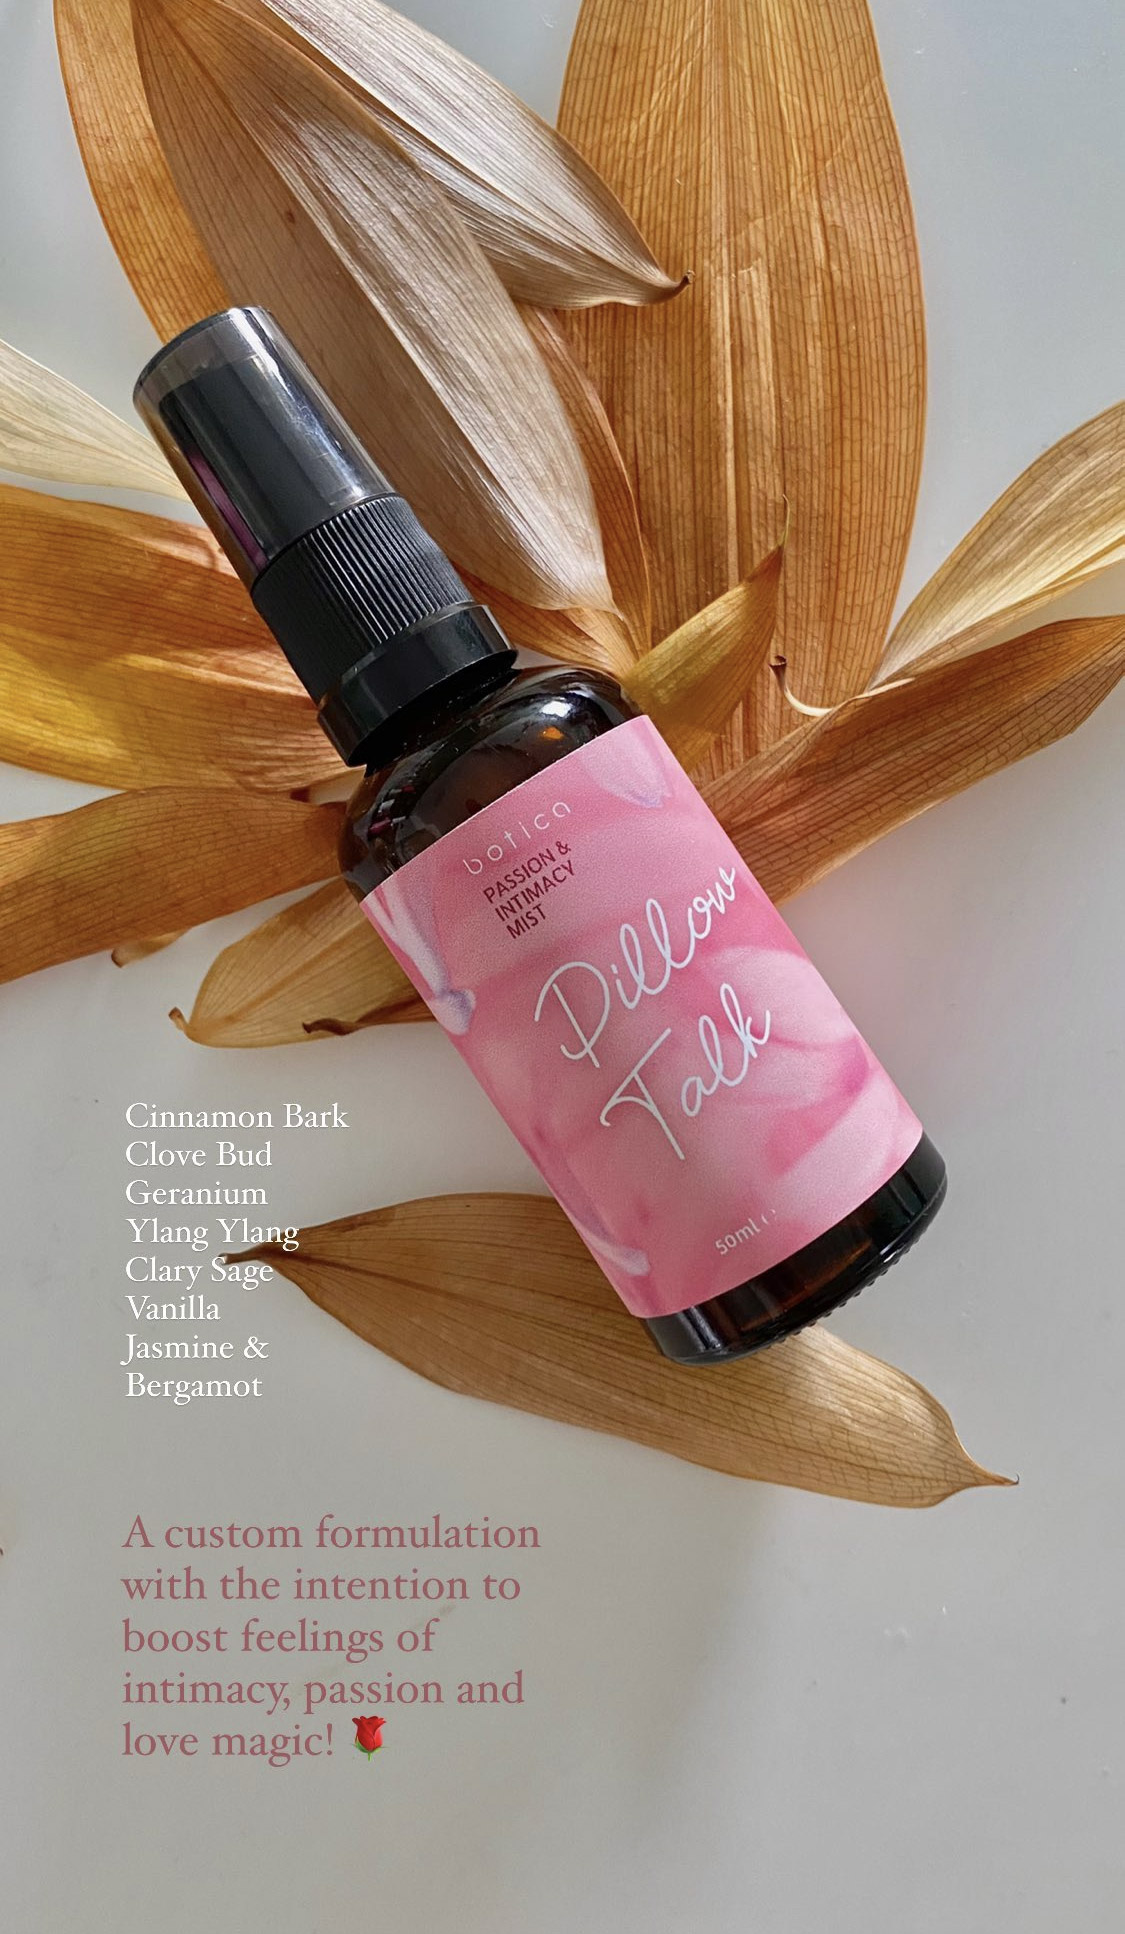 Custom Aromatherapy Blend by BOTICA natural remedies, based in Kuala Lumpur